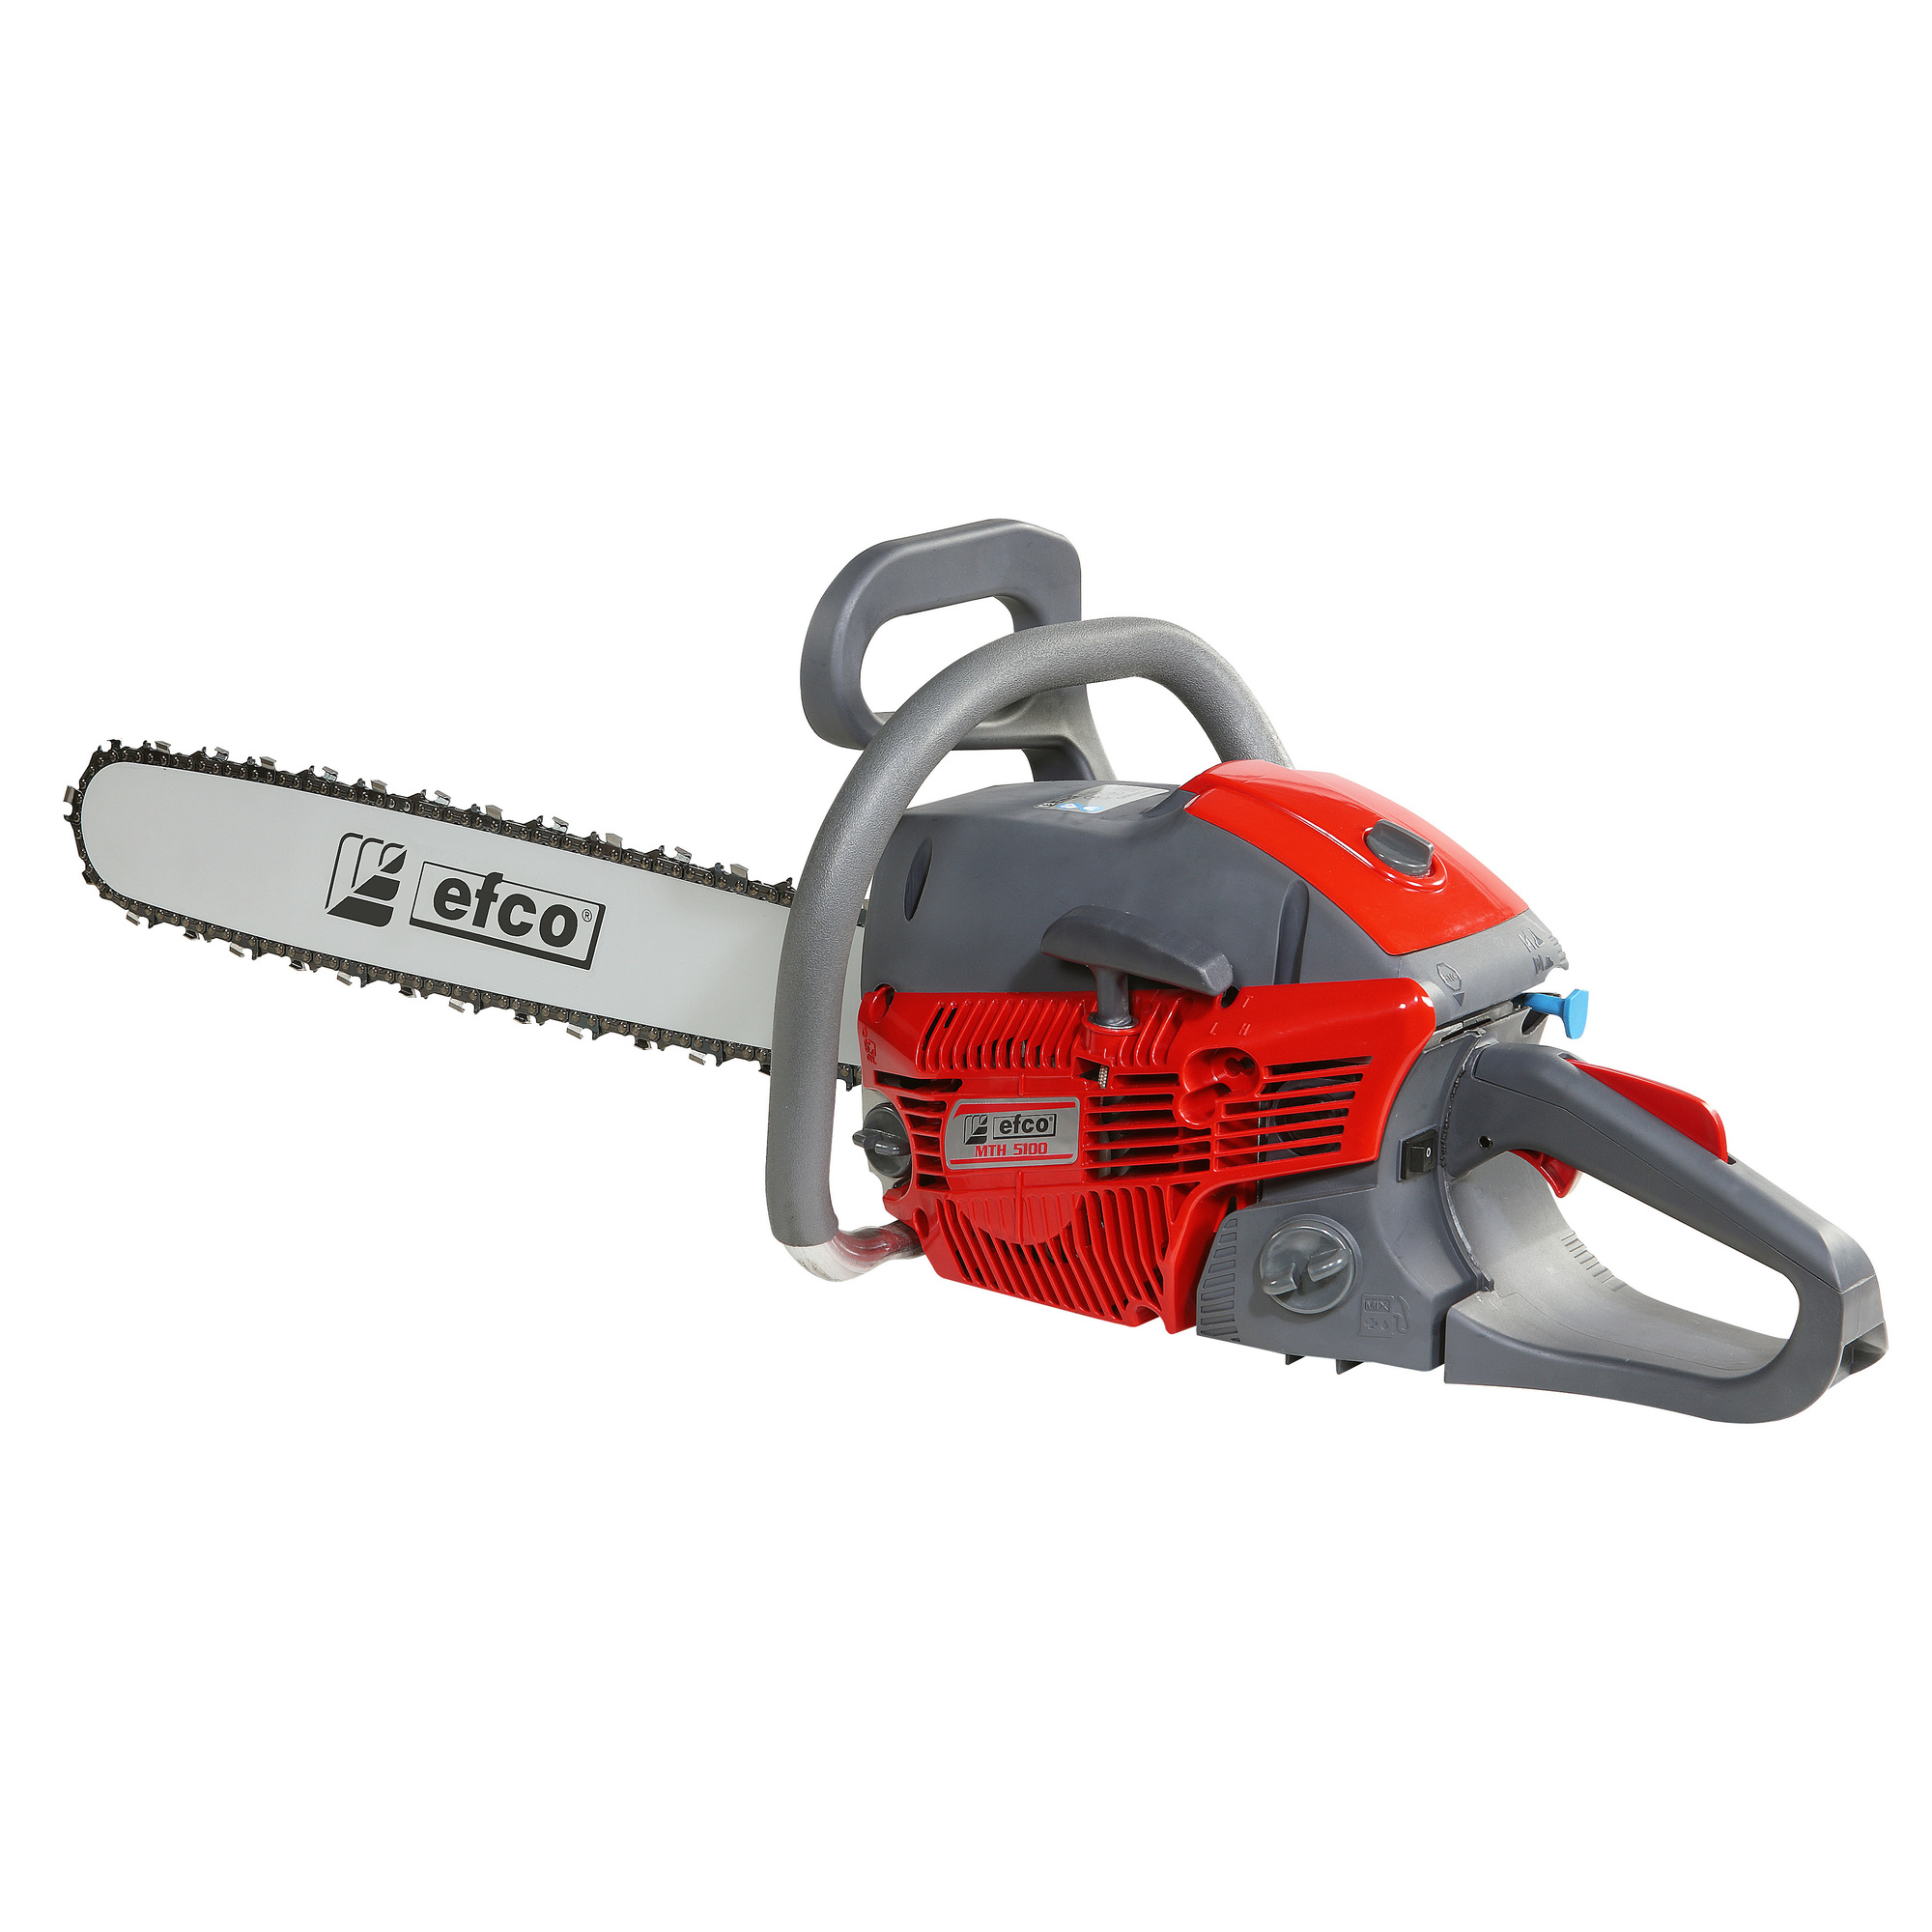 Efco, H-Series Gas Chainsaw, Bar Length 18 in, Engine Displacement 50.9 cc, Model MTH5100-18